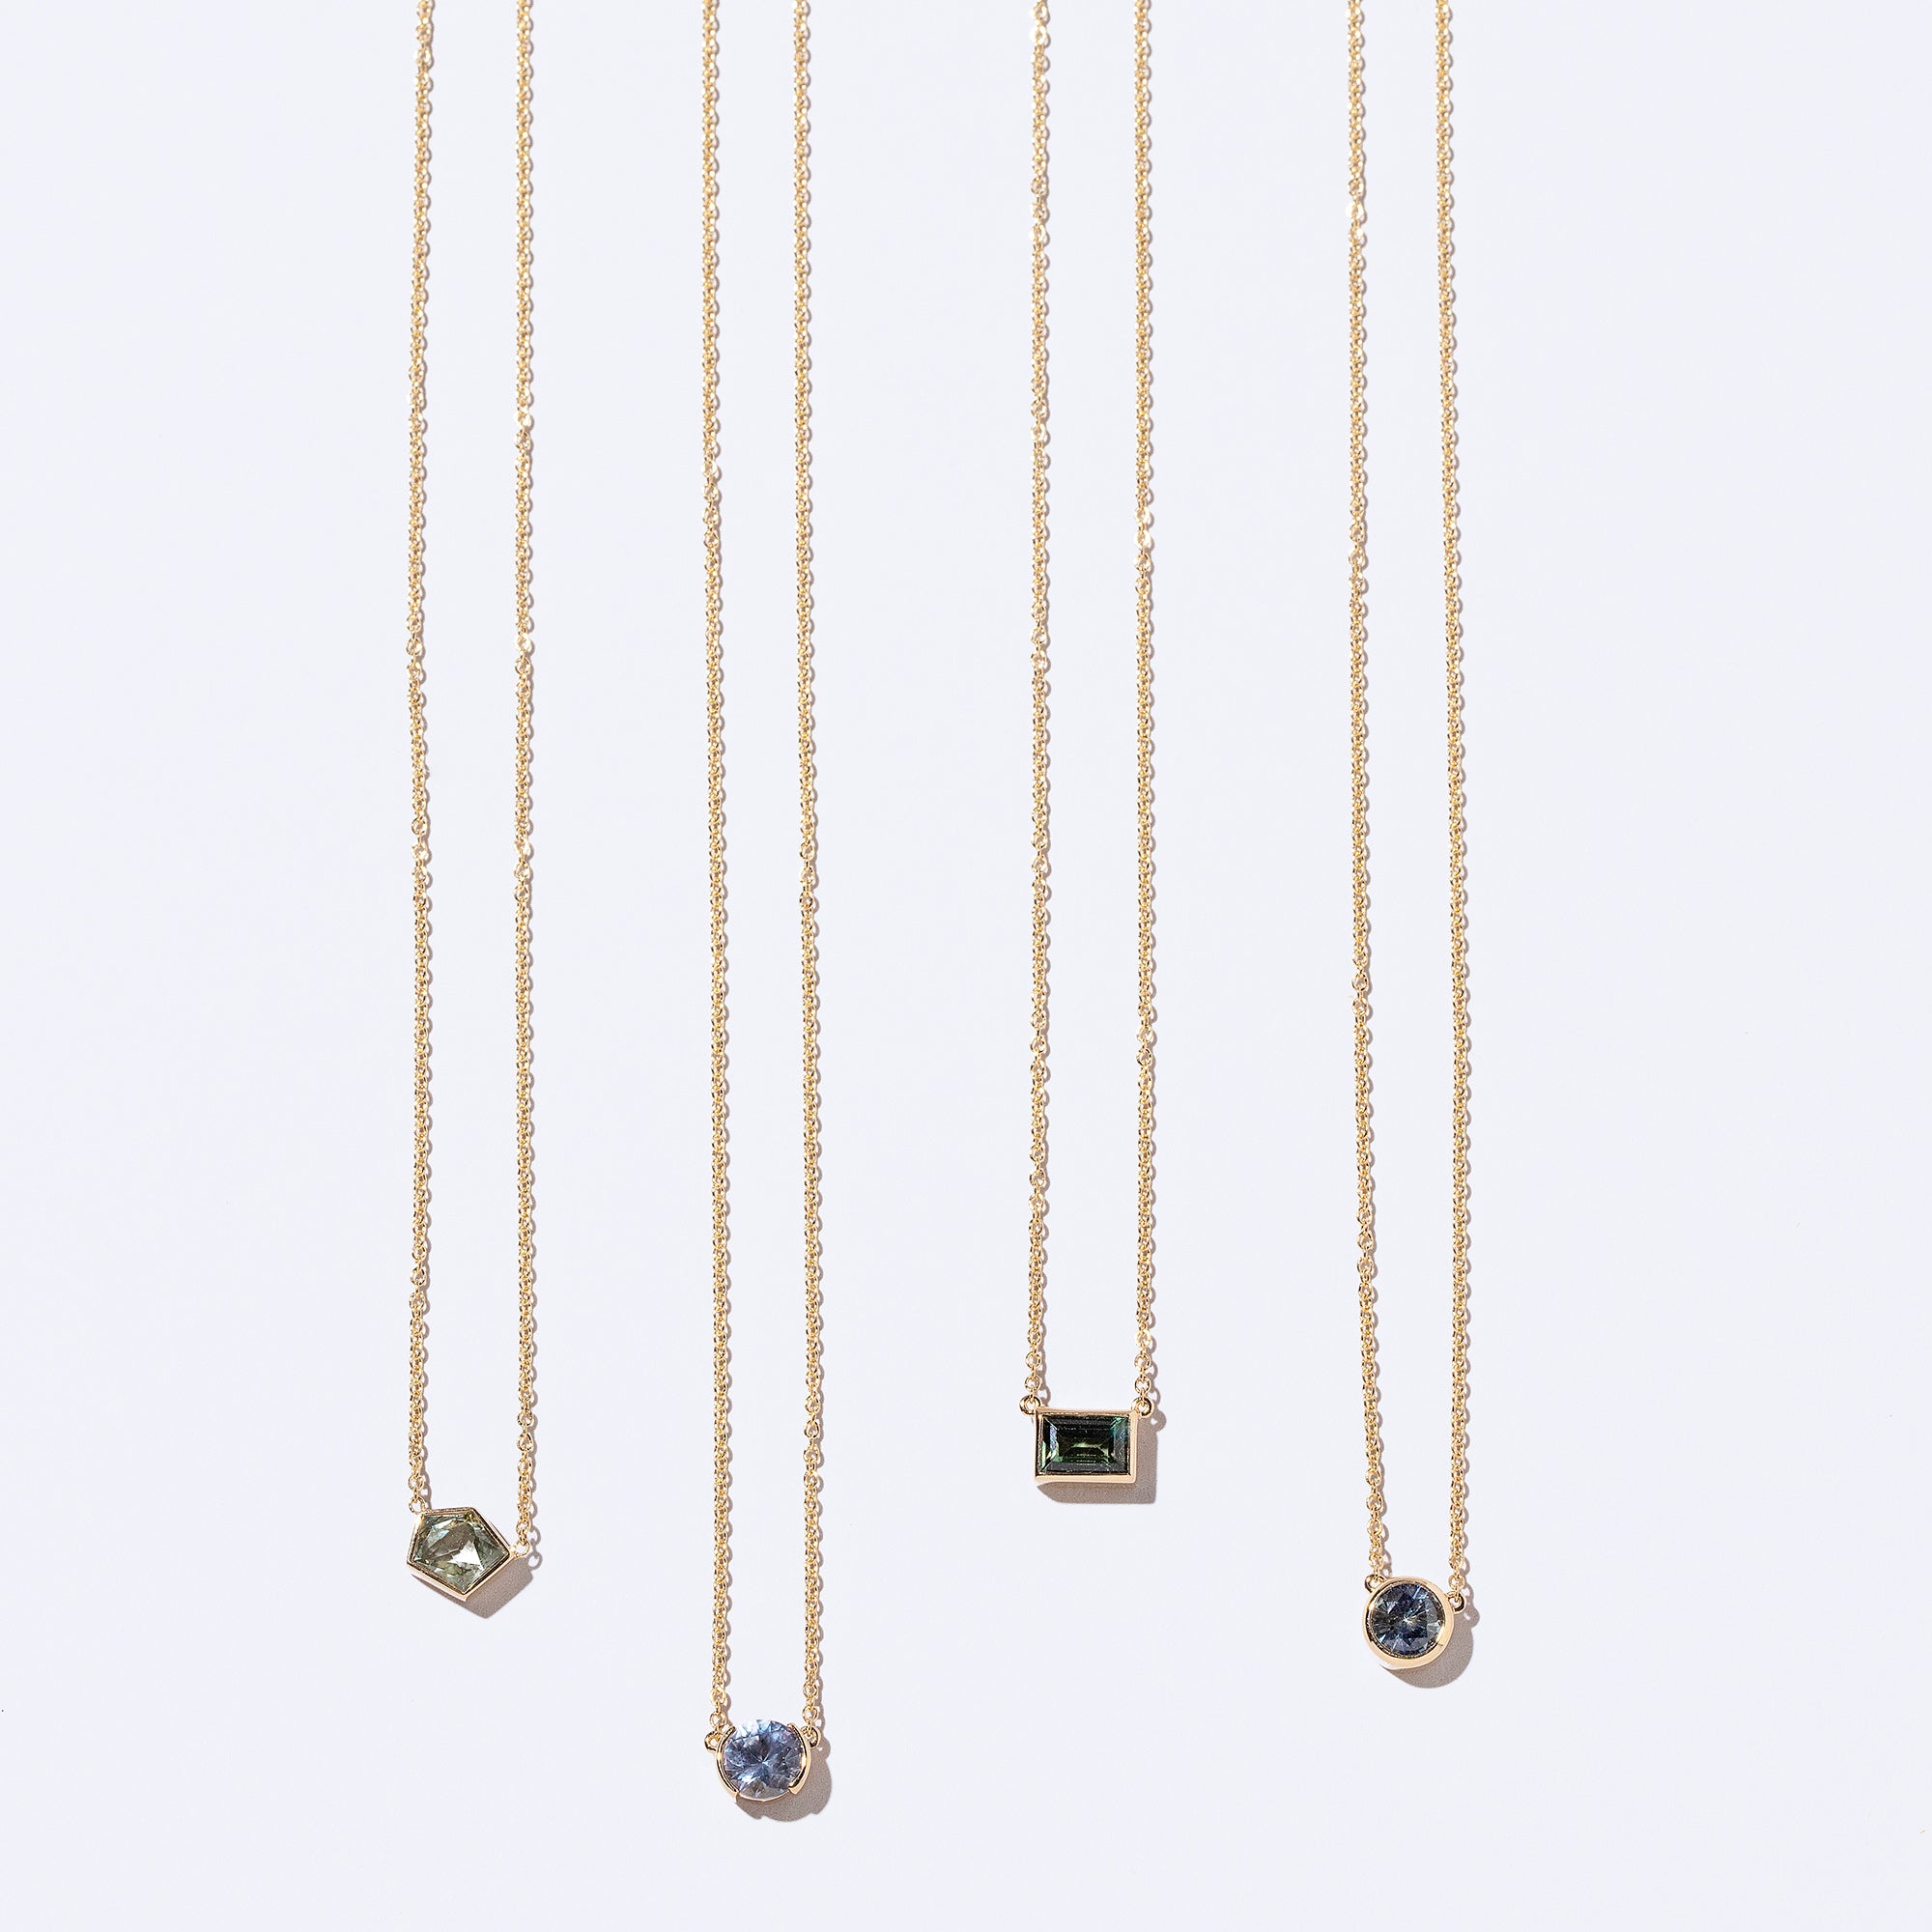 product_details::Geometric Sapphire Necklaces on light colored background.